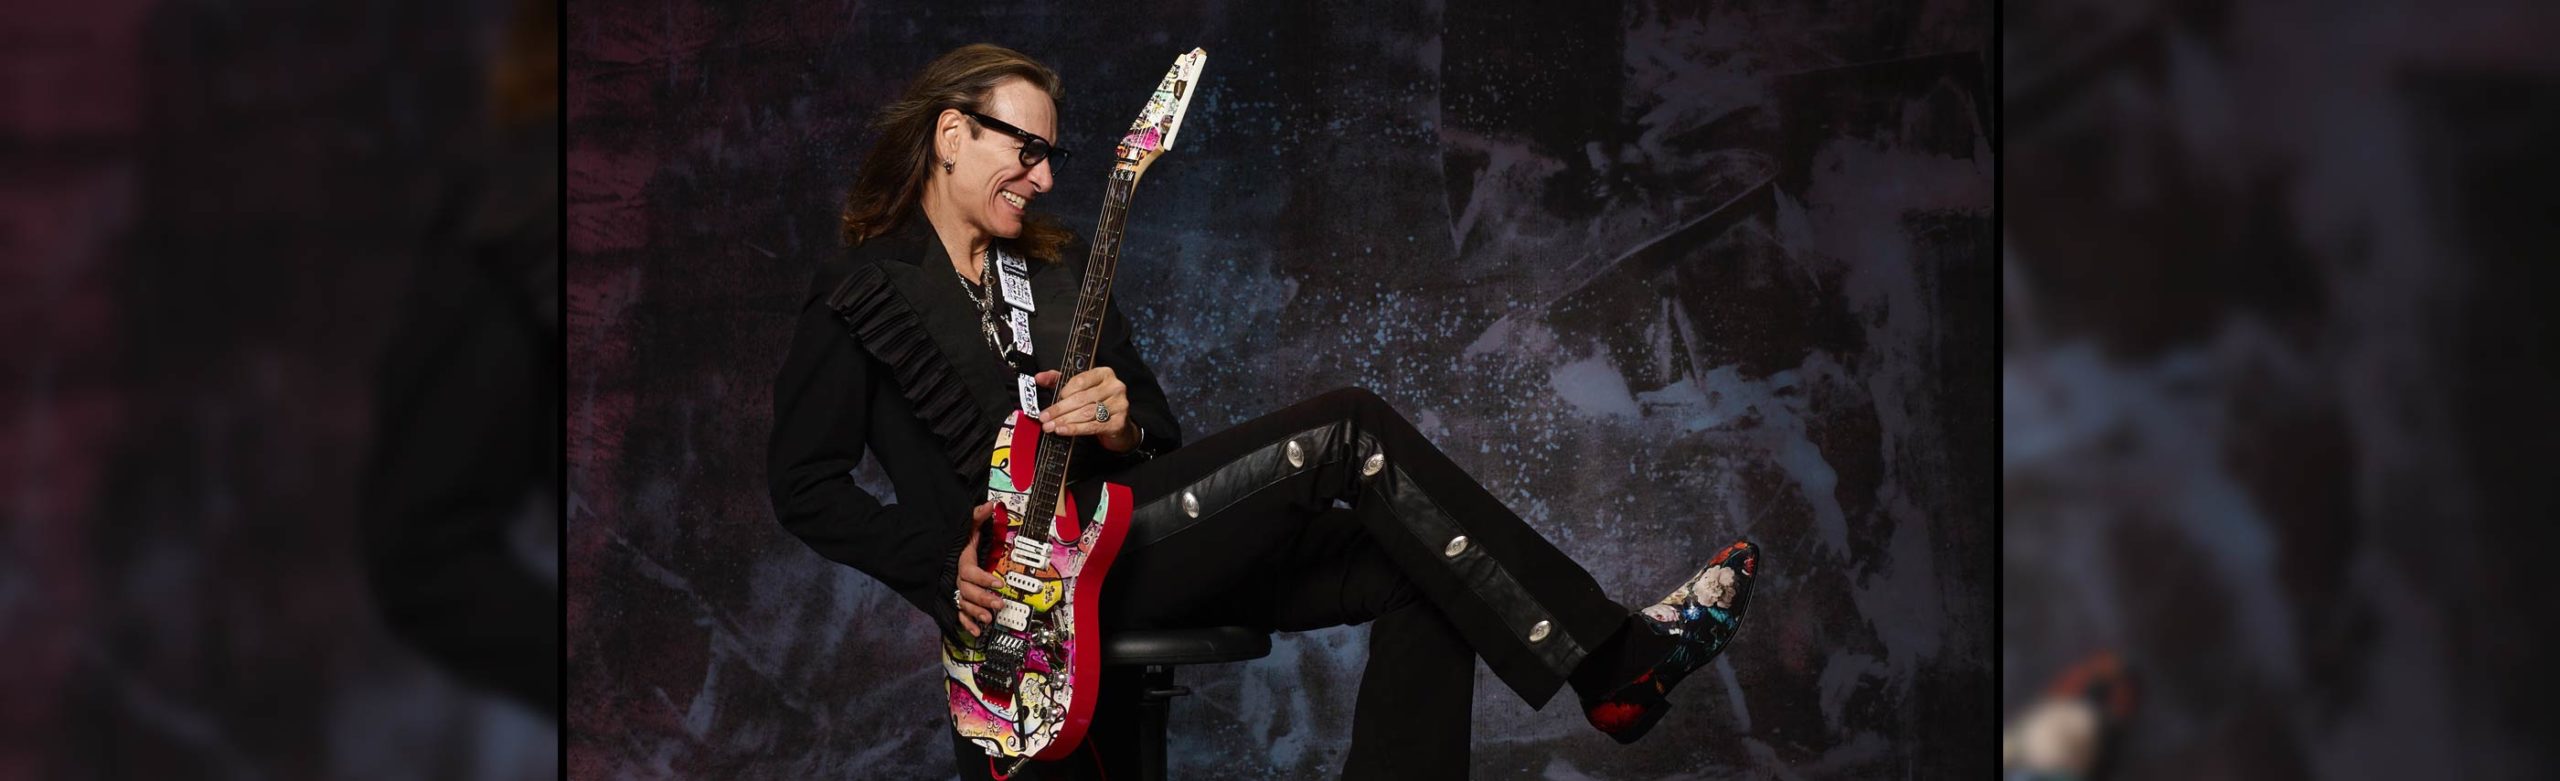 Steve Vai Reschedules Concerts at The ELM and The Wilma to Fall 2022 Image